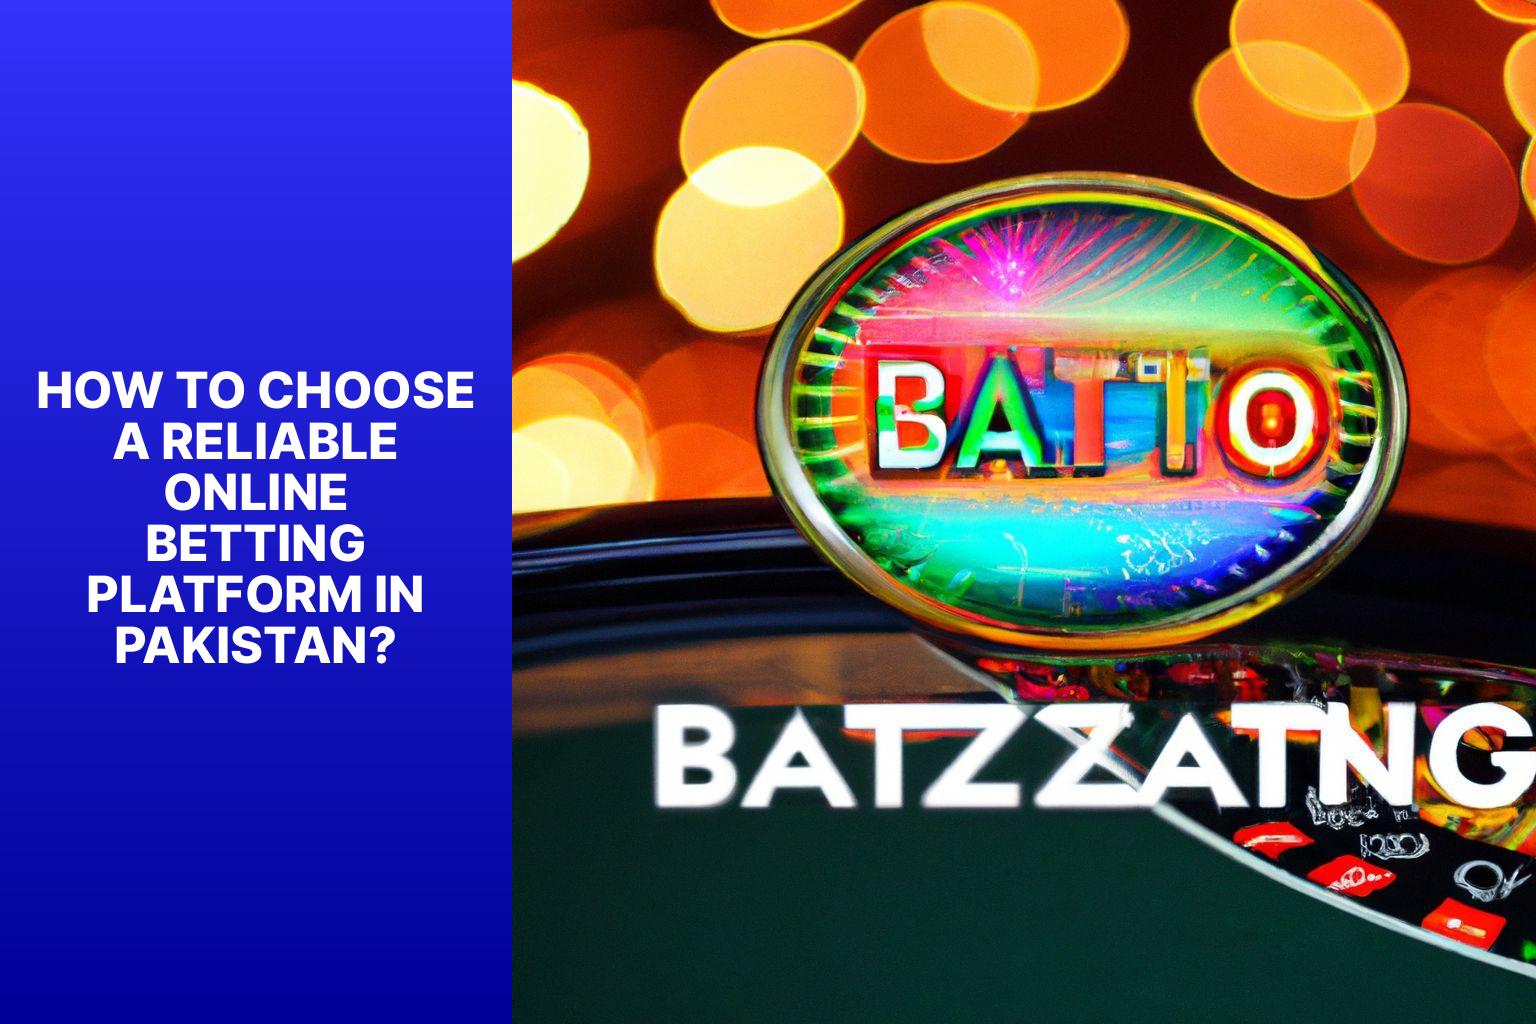 How to Choose a Reliable Online Betting Platform in Pakistan? - Online Betting in Pakistan: Legalities and Options 